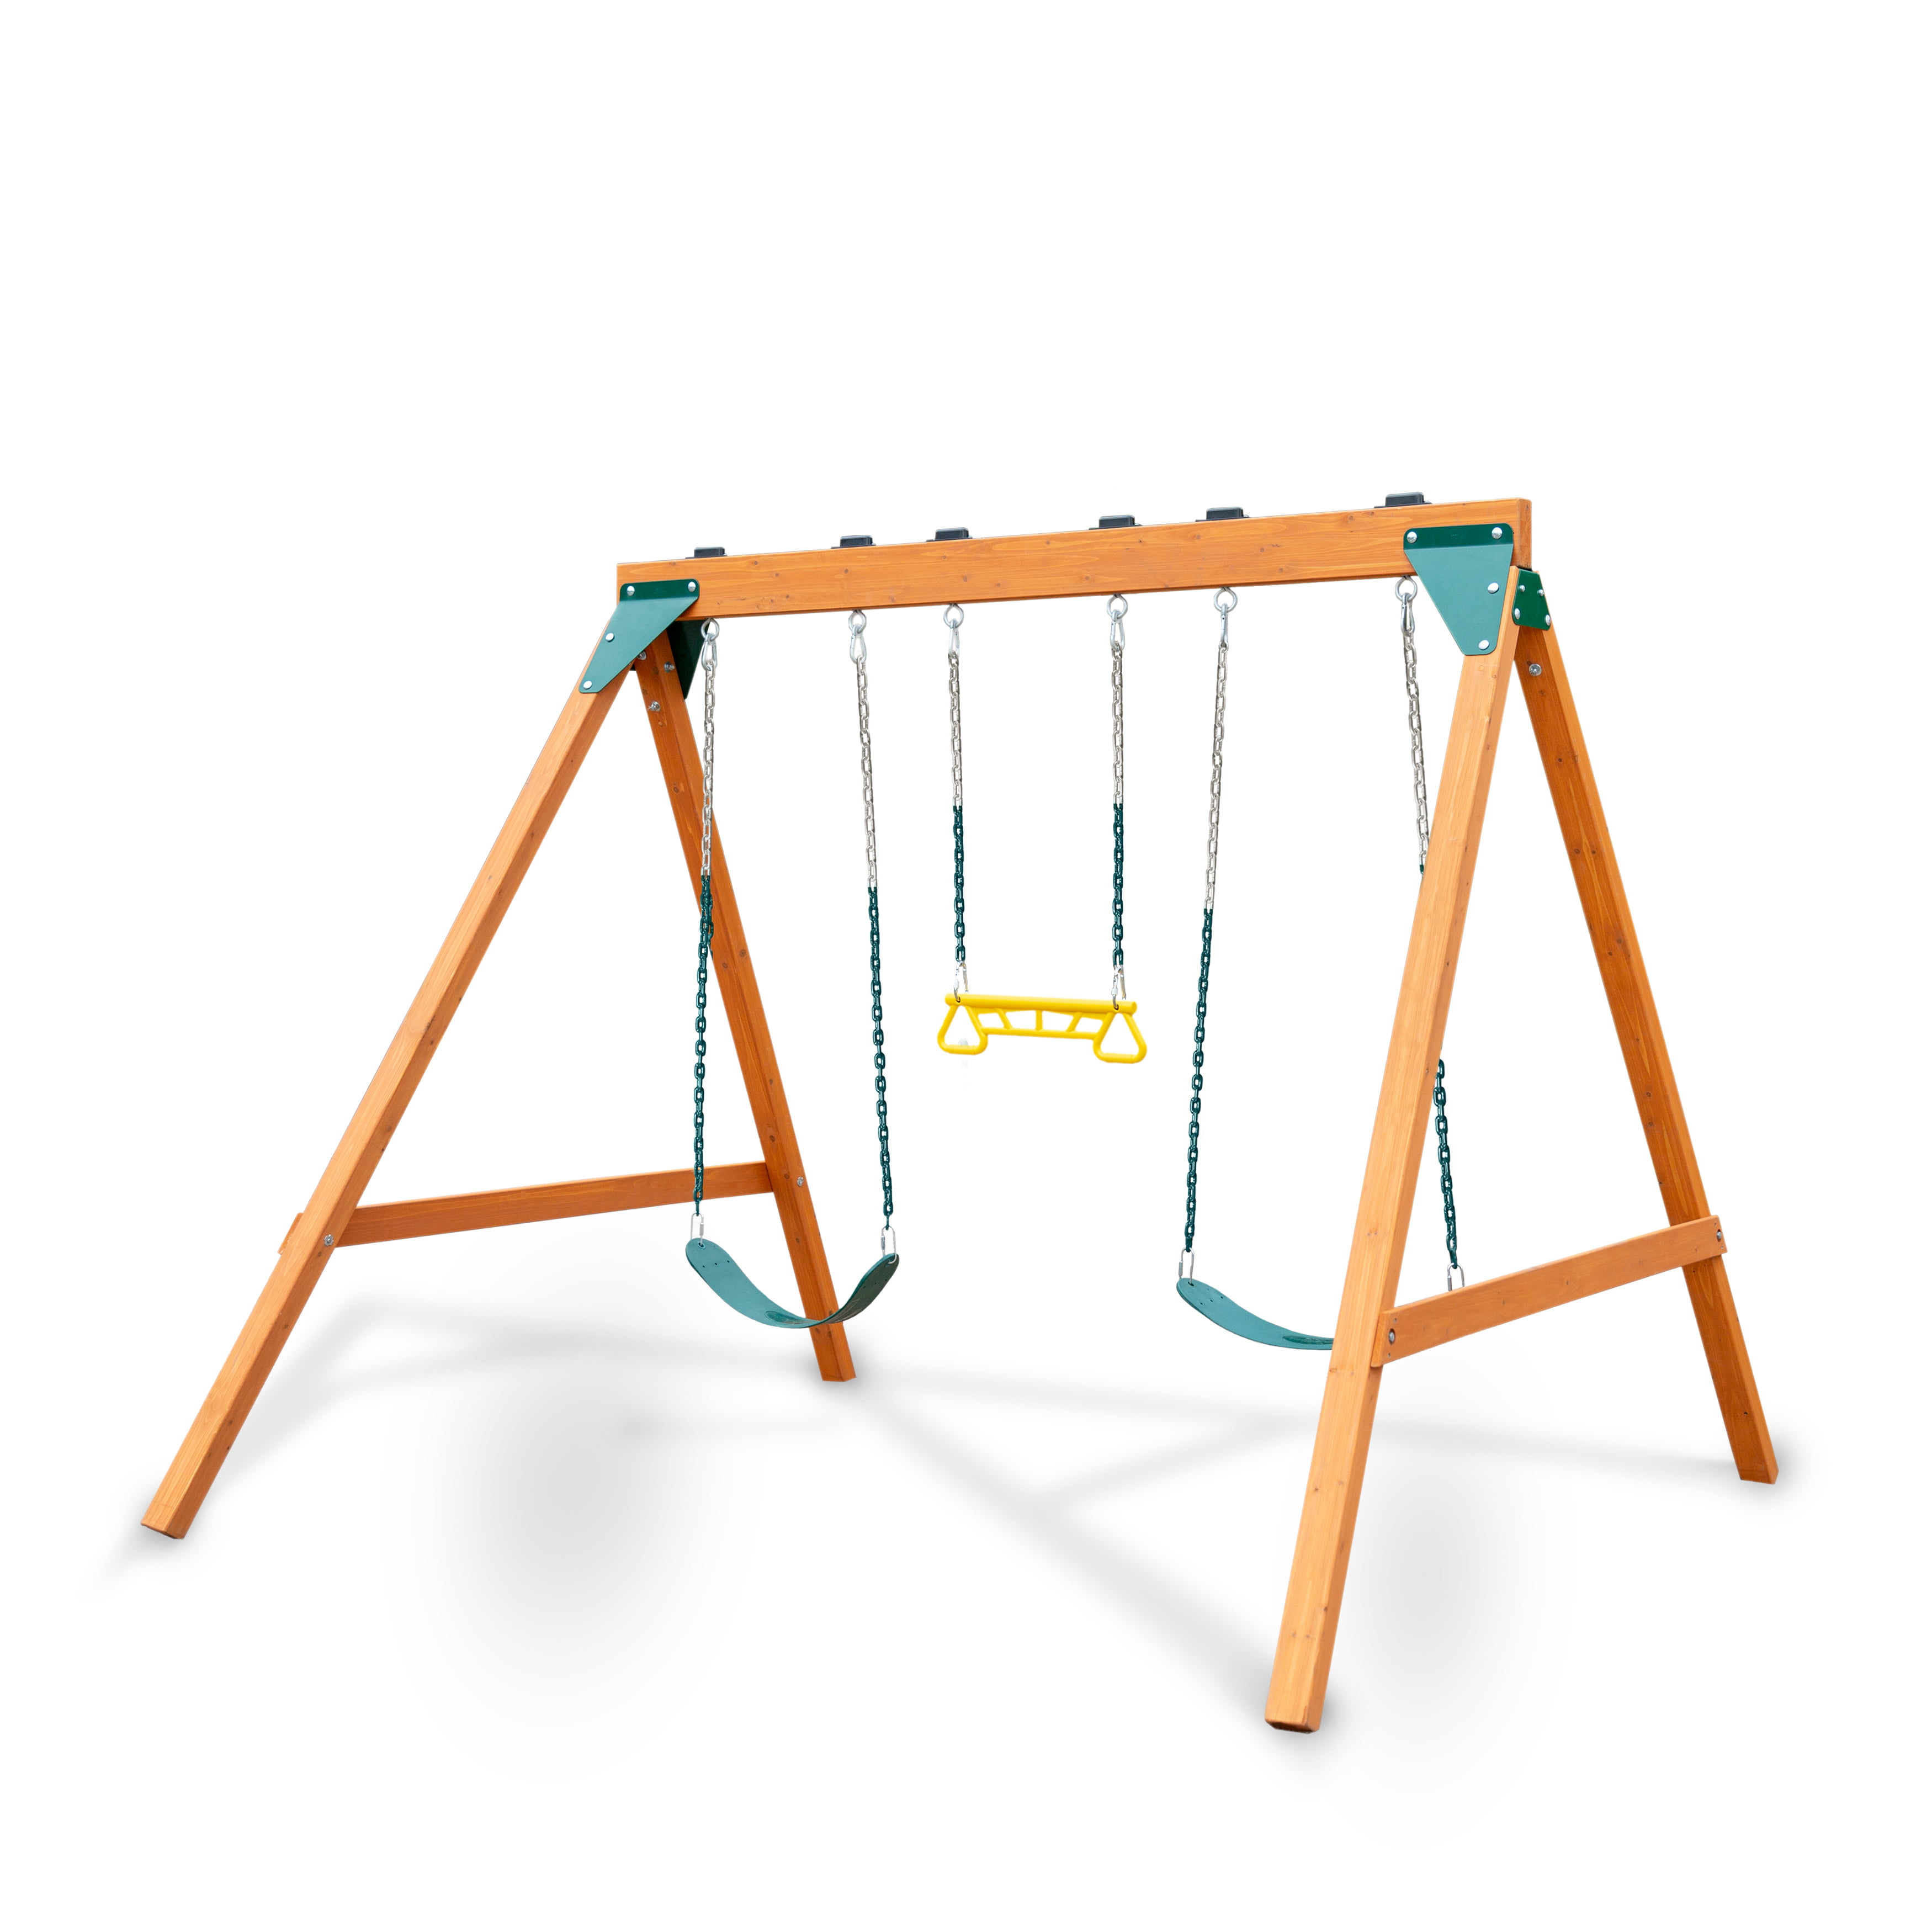 Swing-N-Slide WS 5102 2 Pack of Blue Swing Seats with Ring/Trapeze Combo Swing Swing Set Refresher Bundle Blue